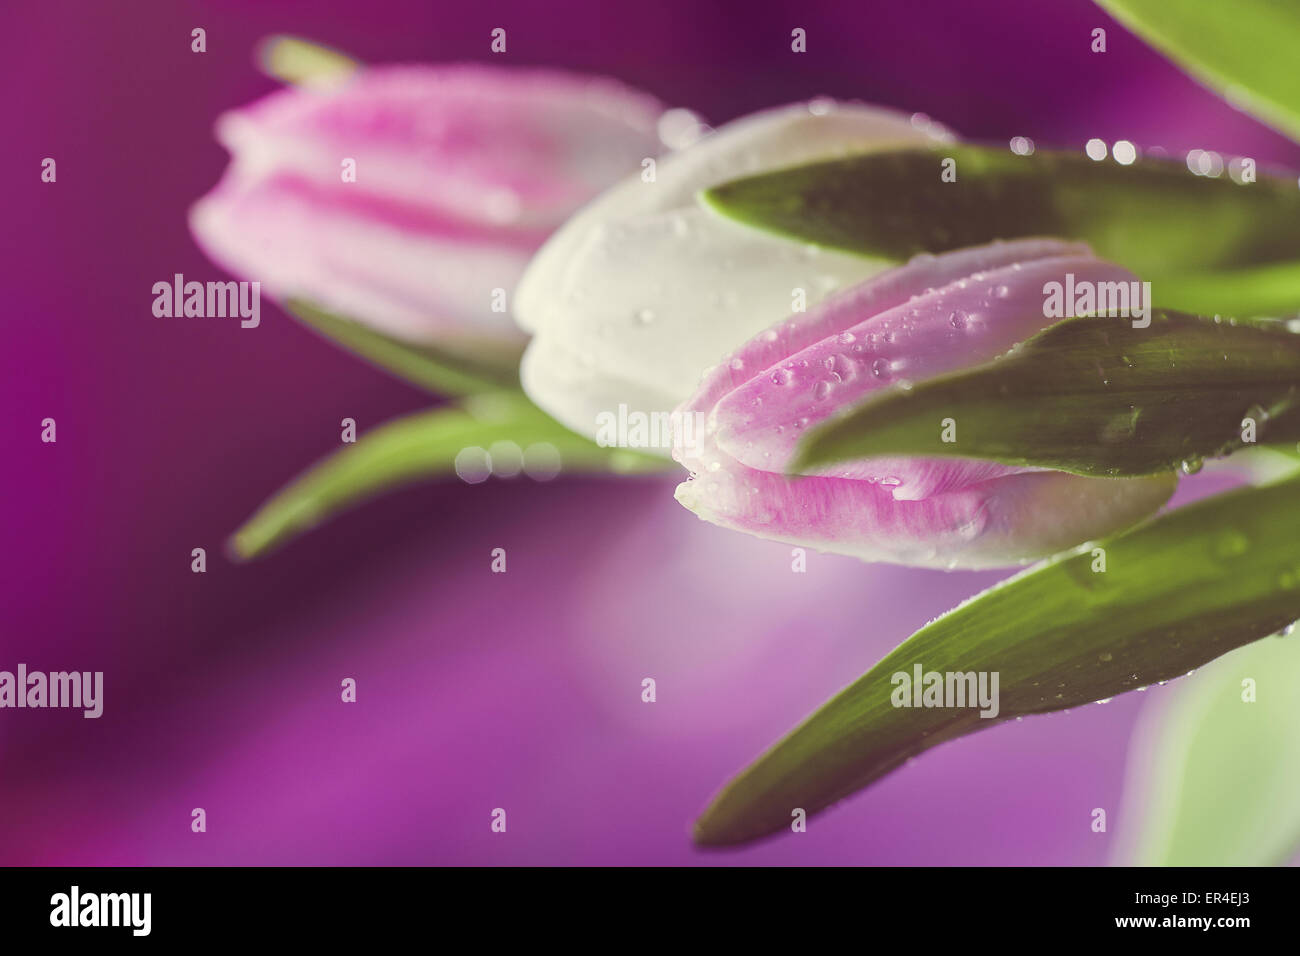 Tulips with water droplets against a purple backdrop Stock Photo